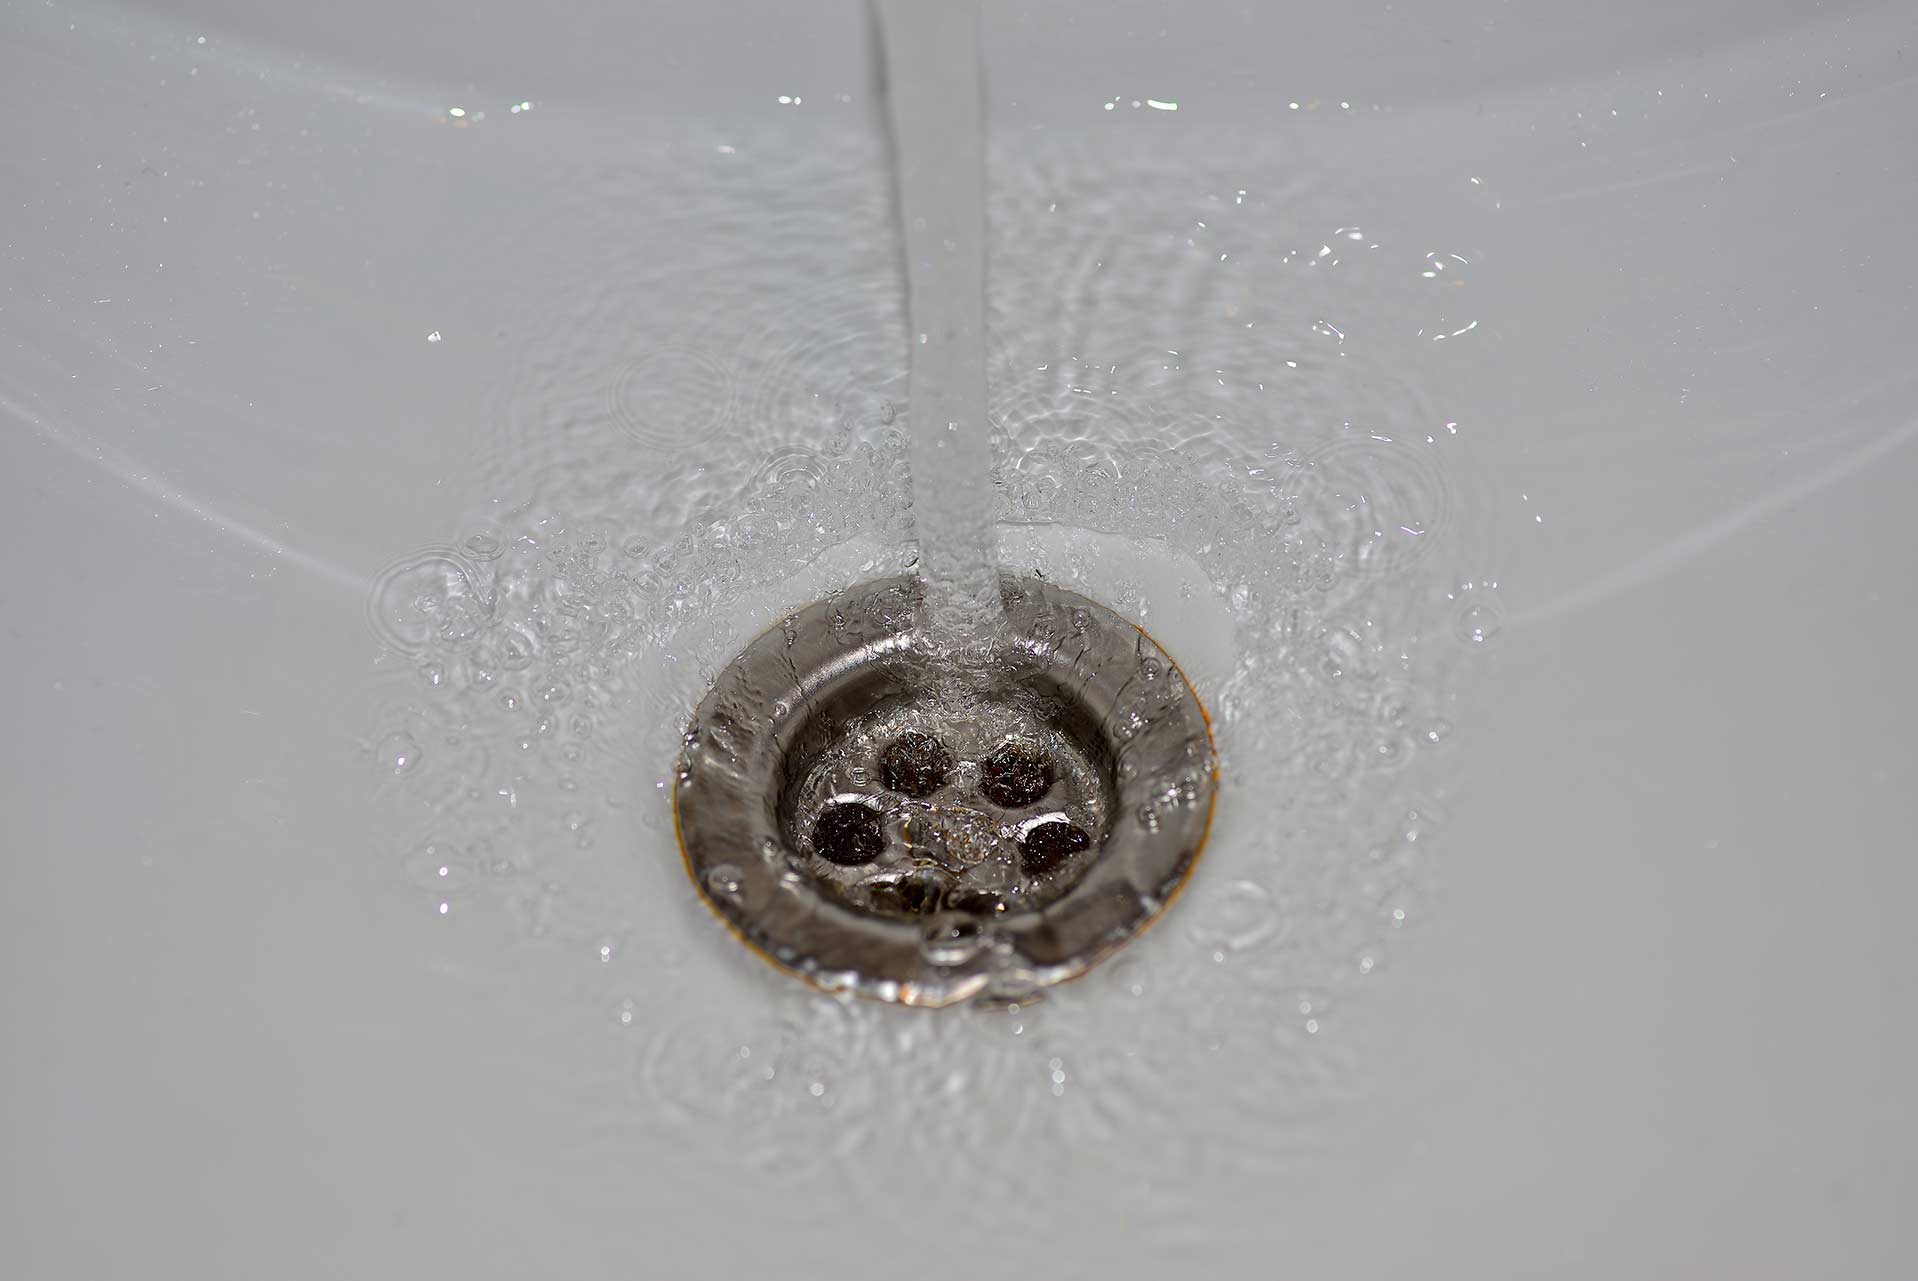 A2B Drains provides services to unblock blocked sinks and drains for properties in Lewisham.